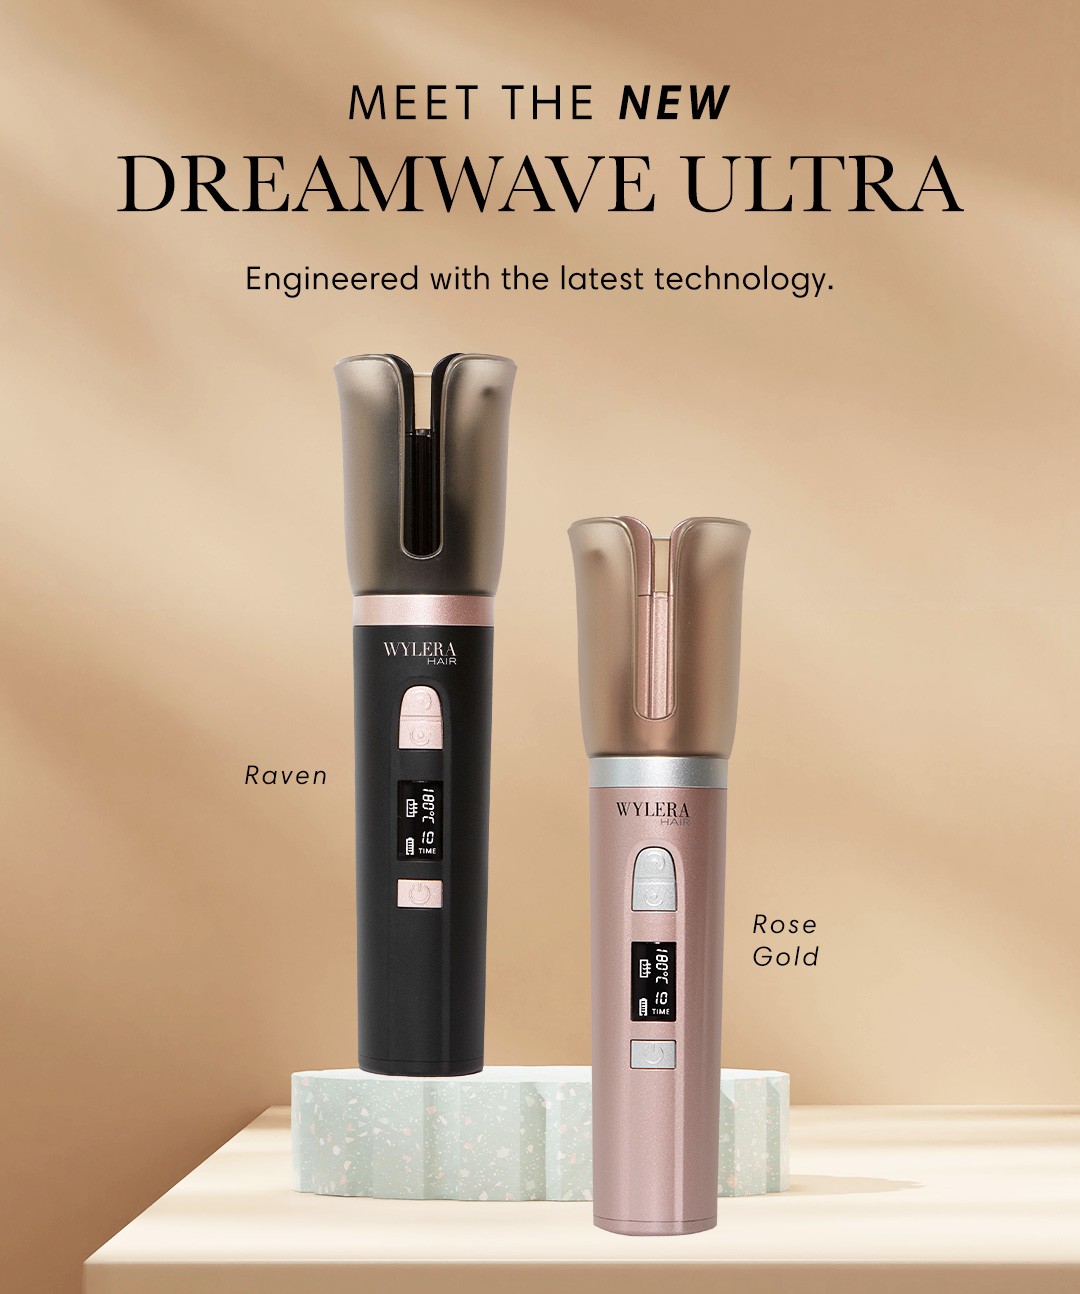 MEET THE NEW DREAMWAVE ULTRA Engineered with the latest technology. LOYRTEY 3 8 Raven 